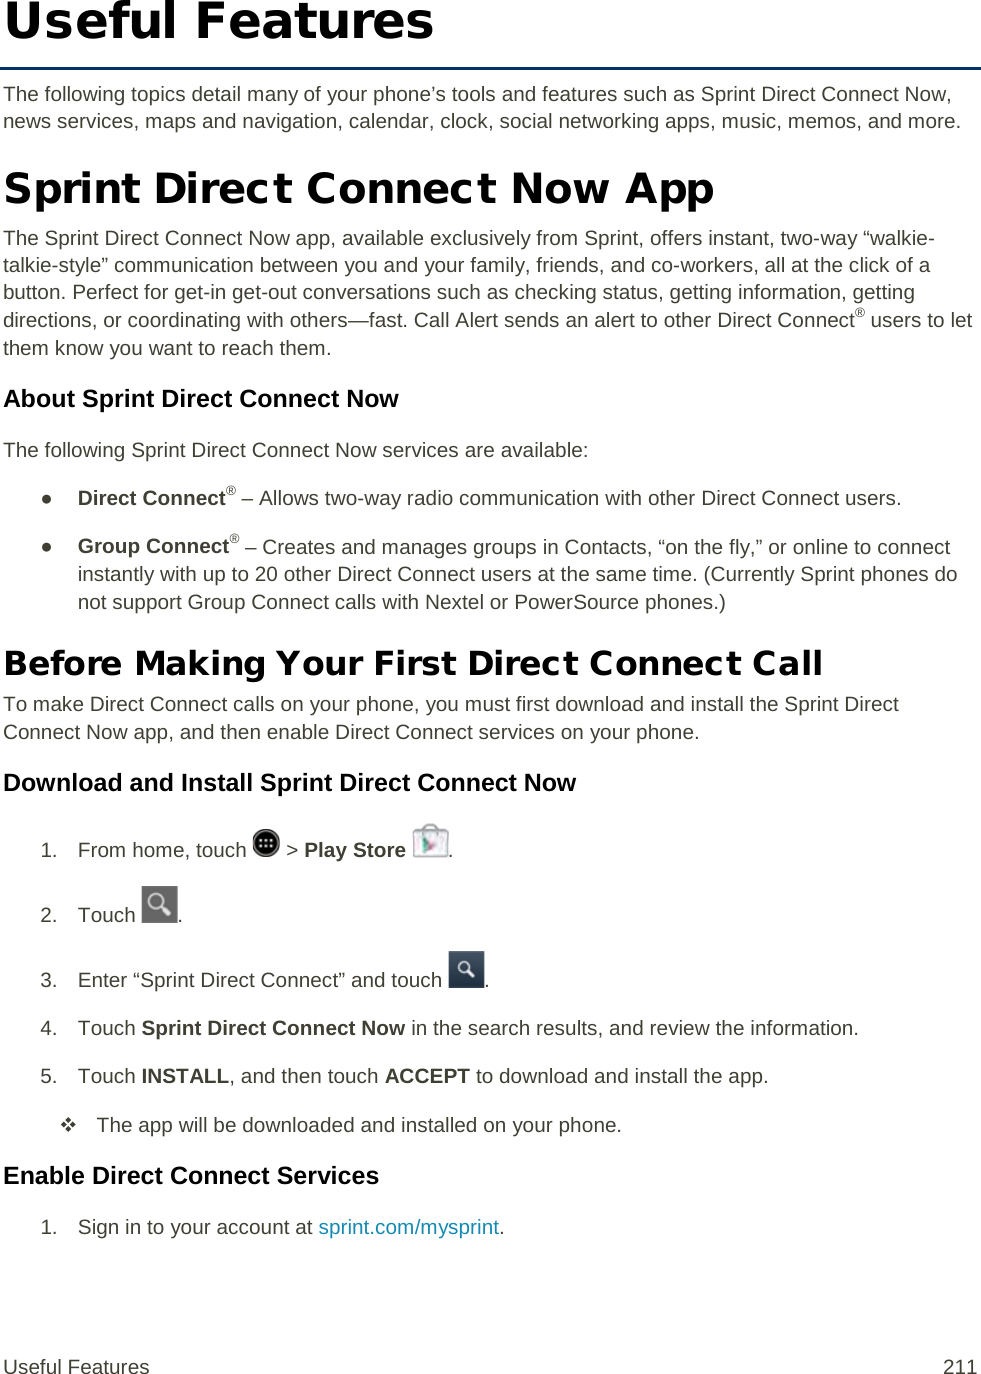 Useful Features The following topics detail many of your phone’s tools and features such as Sprint Direct Connect Now, news services, maps and navigation, calendar, clock, social networking apps, music, memos, and more. Sprint Direct Connect Now App The Sprint Direct Connect Now app, available exclusively from Sprint, offers instant, two-way “walkie-talkie-style” communication between you and your family, friends, and co-workers, all at the click of a button. Perfect for get-in get-out conversations such as checking status, getting information, getting directions, or coordinating with others—fast. Call Alert sends an alert to other Direct Connect® users to let them know you want to reach them. About Sprint Direct Connect Now The following Sprint Direct Connect Now services are available: ● Direct Connect® – Allows two-way radio communication with other Direct Connect users. ● Group Connect® – Creates and manages groups in Contacts, “on the fly,” or online to connect instantly with up to 20 other Direct Connect users at the same time. (Currently Sprint phones do not support Group Connect calls with Nextel or PowerSource phones.) Before Making Your First Direct Connect Call To make Direct Connect calls on your phone, you must first download and install the Sprint Direct Connect Now app, and then enable Direct Connect services on your phone. Download and Install Sprint Direct Connect Now 1.  From home, touch   &gt; Play Store . 2. Touch  . 3. Enter “Sprint Direct Connect” and touch  . 4. Touch Sprint Direct Connect Now in the search results, and review the information. 5. Touch INSTALL, and then touch ACCEPT to download and install the app.  The app will be downloaded and installed on your phone. Enable Direct Connect Services  1. Sign in to your account at sprint.com/mysprint. Useful Features 211   